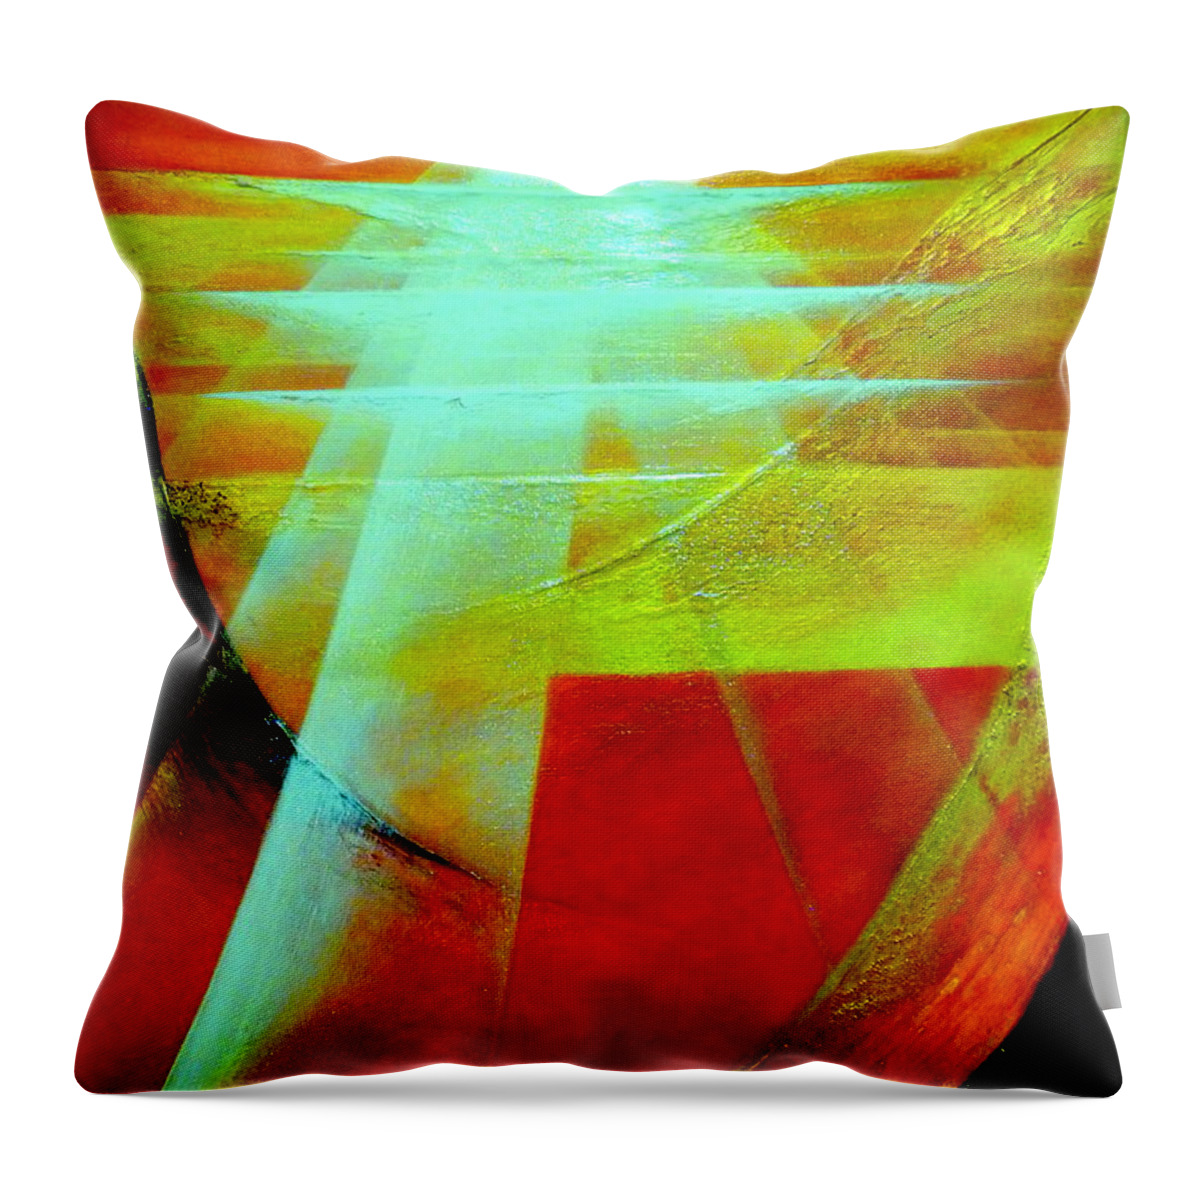 Sun.light.energy.white.sky.mountain.crystal.hope.positive.landscape.abstract. Throw Pillow featuring the painting Hope #10 by Kumiko Mayer